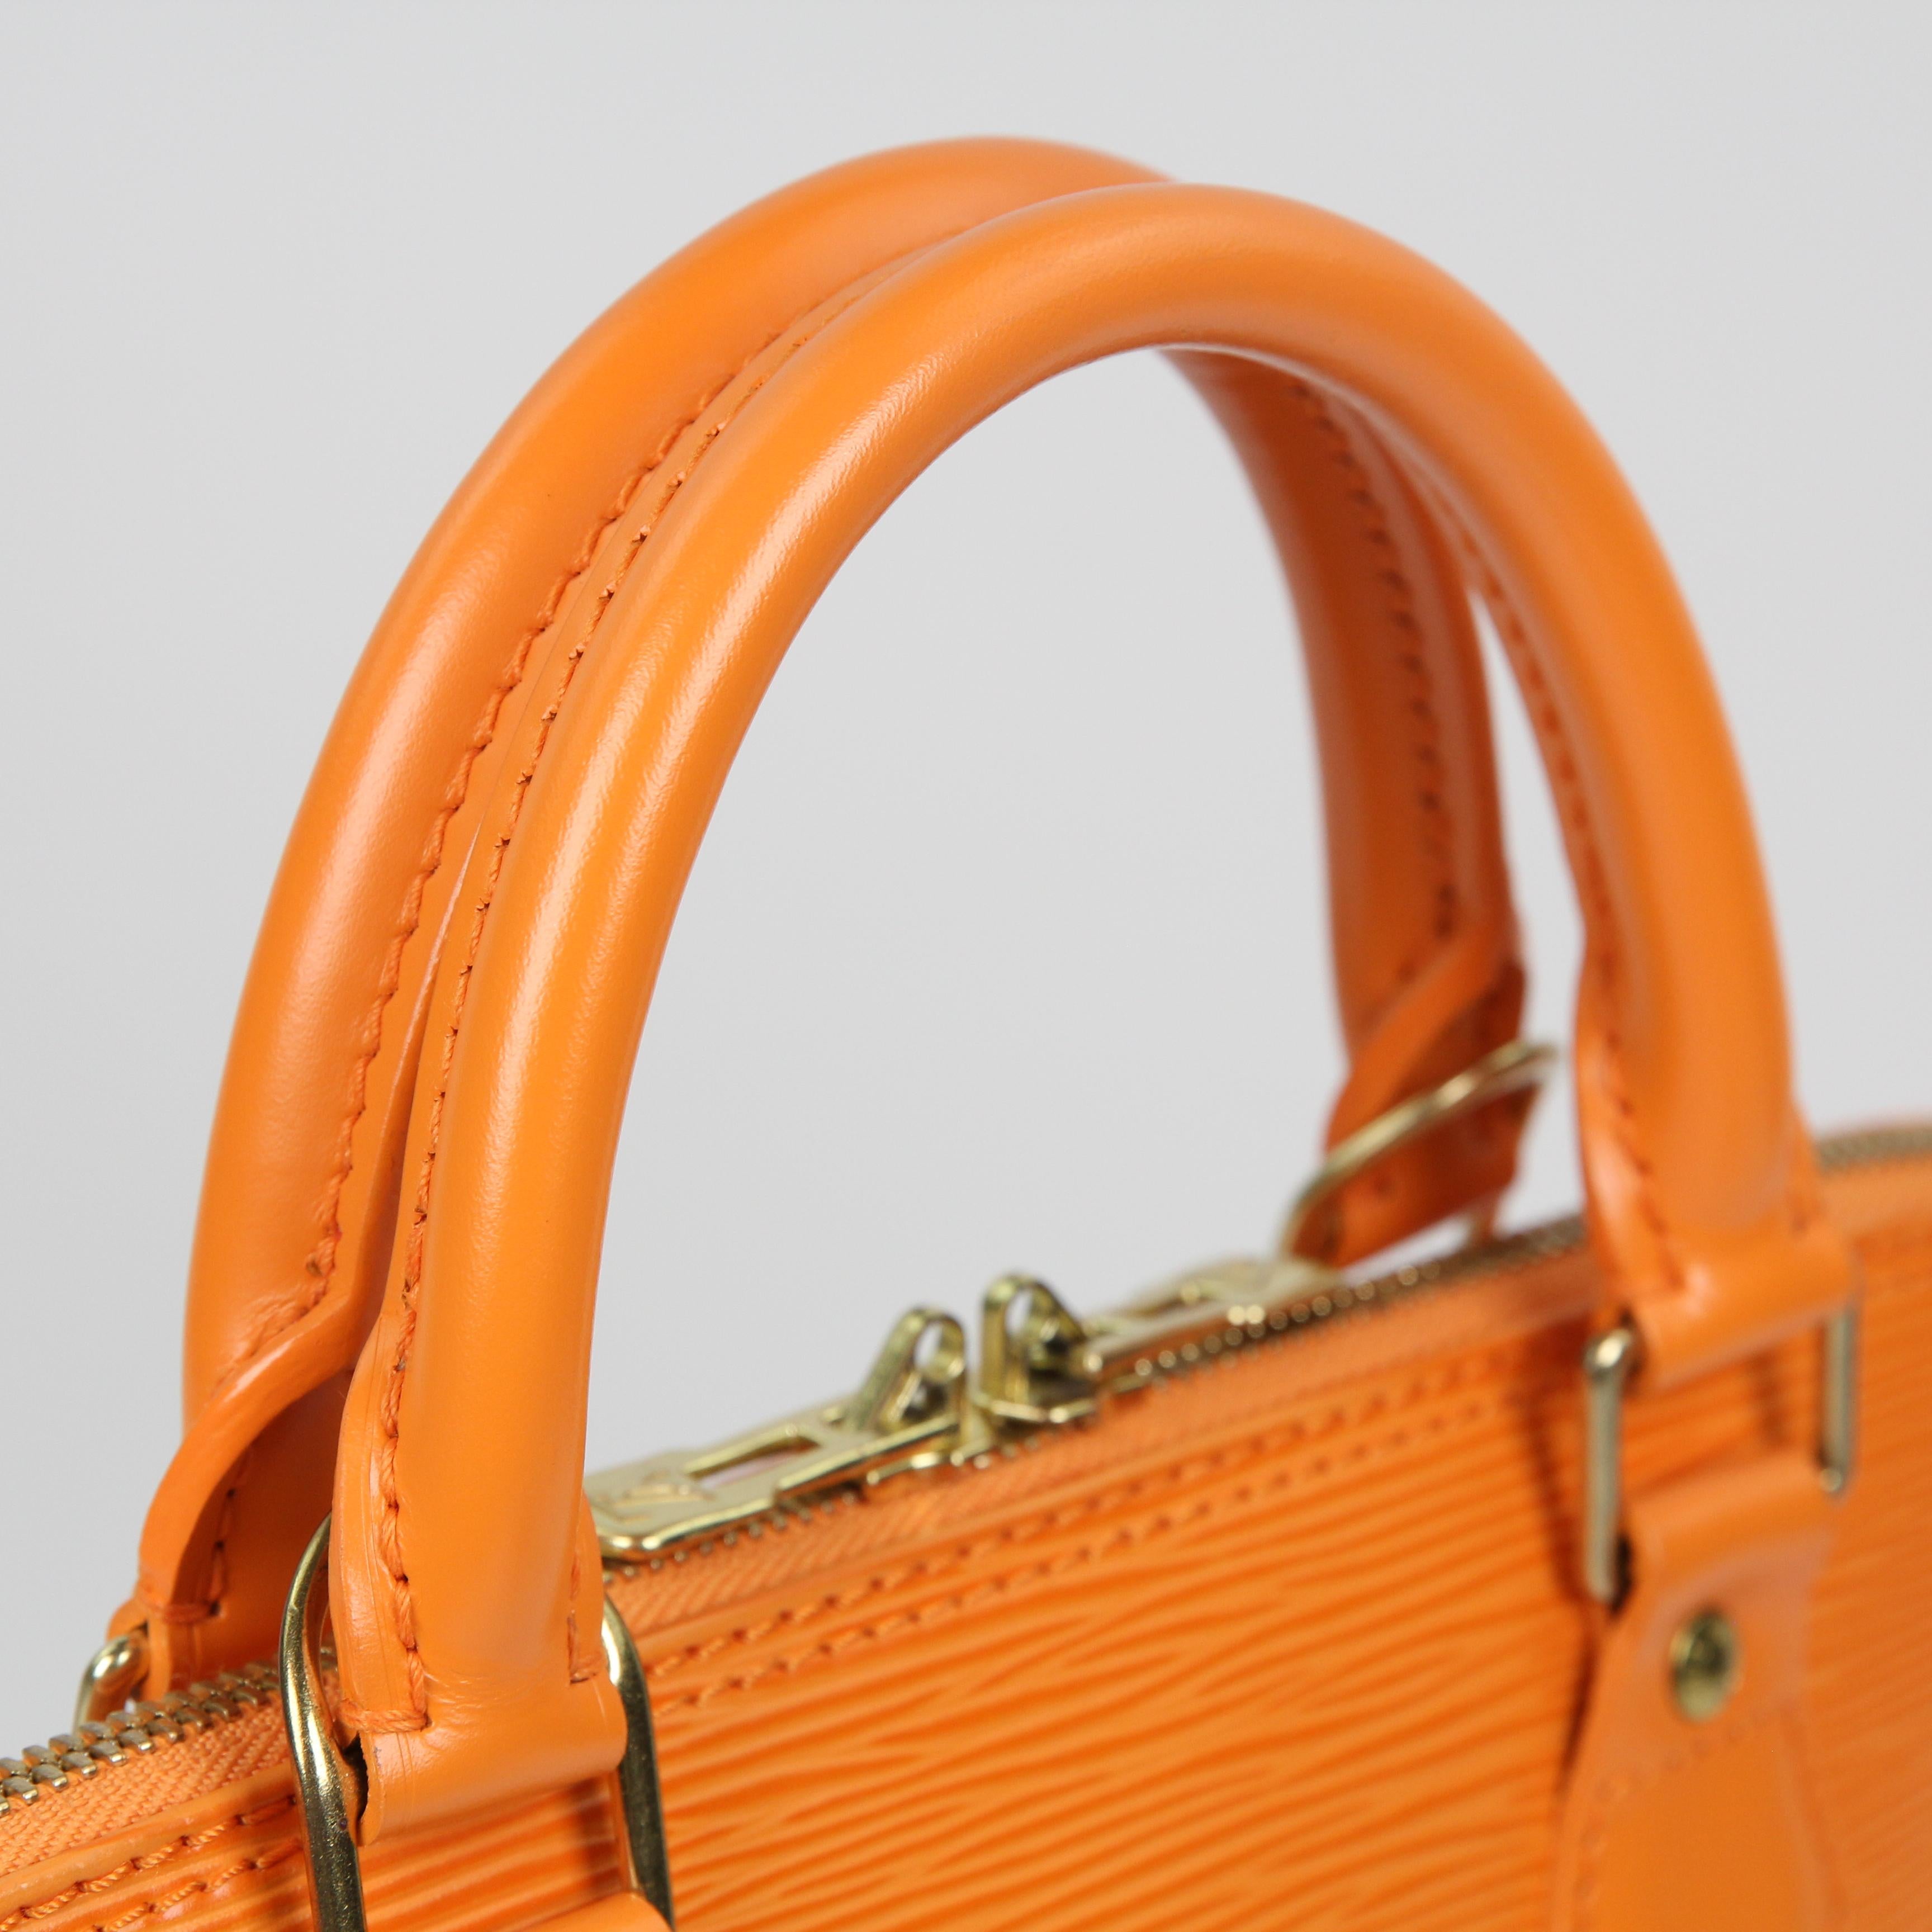 This Louis Vuitton Orange Epi Leather Alma Bag is made for anyone with impeccable taste. With its classic shape and roomy interior, this timeless piece makes a great, practical everyday bag.
The exterior Epi leather is clean and in excellent